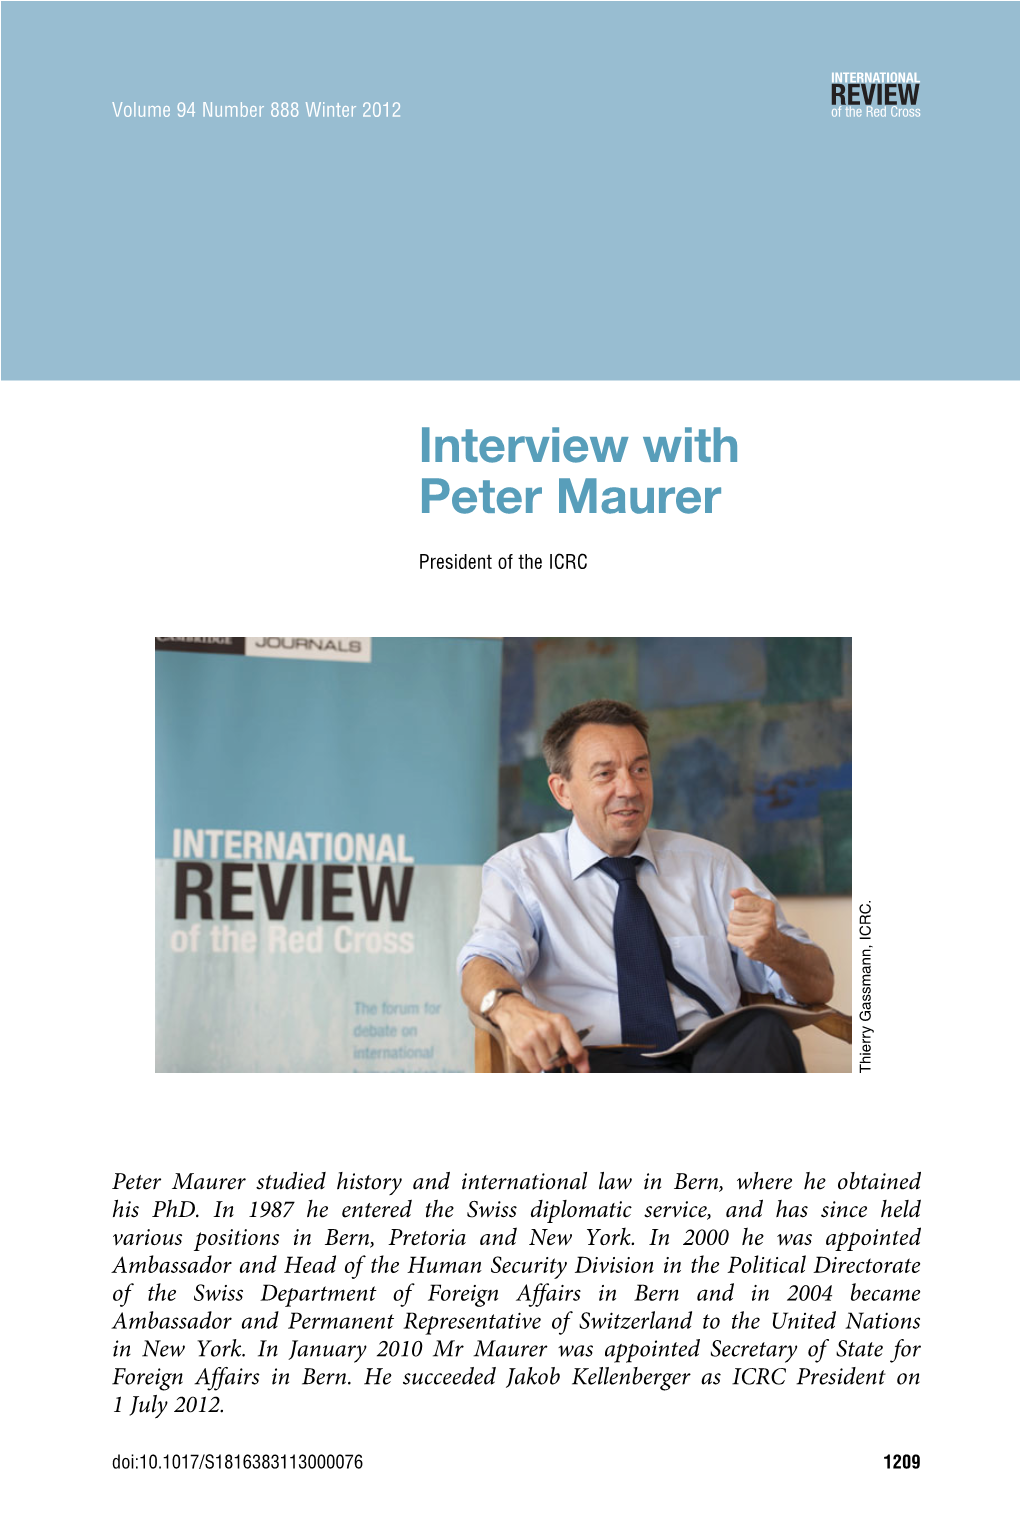 Interview with Peter Maurer